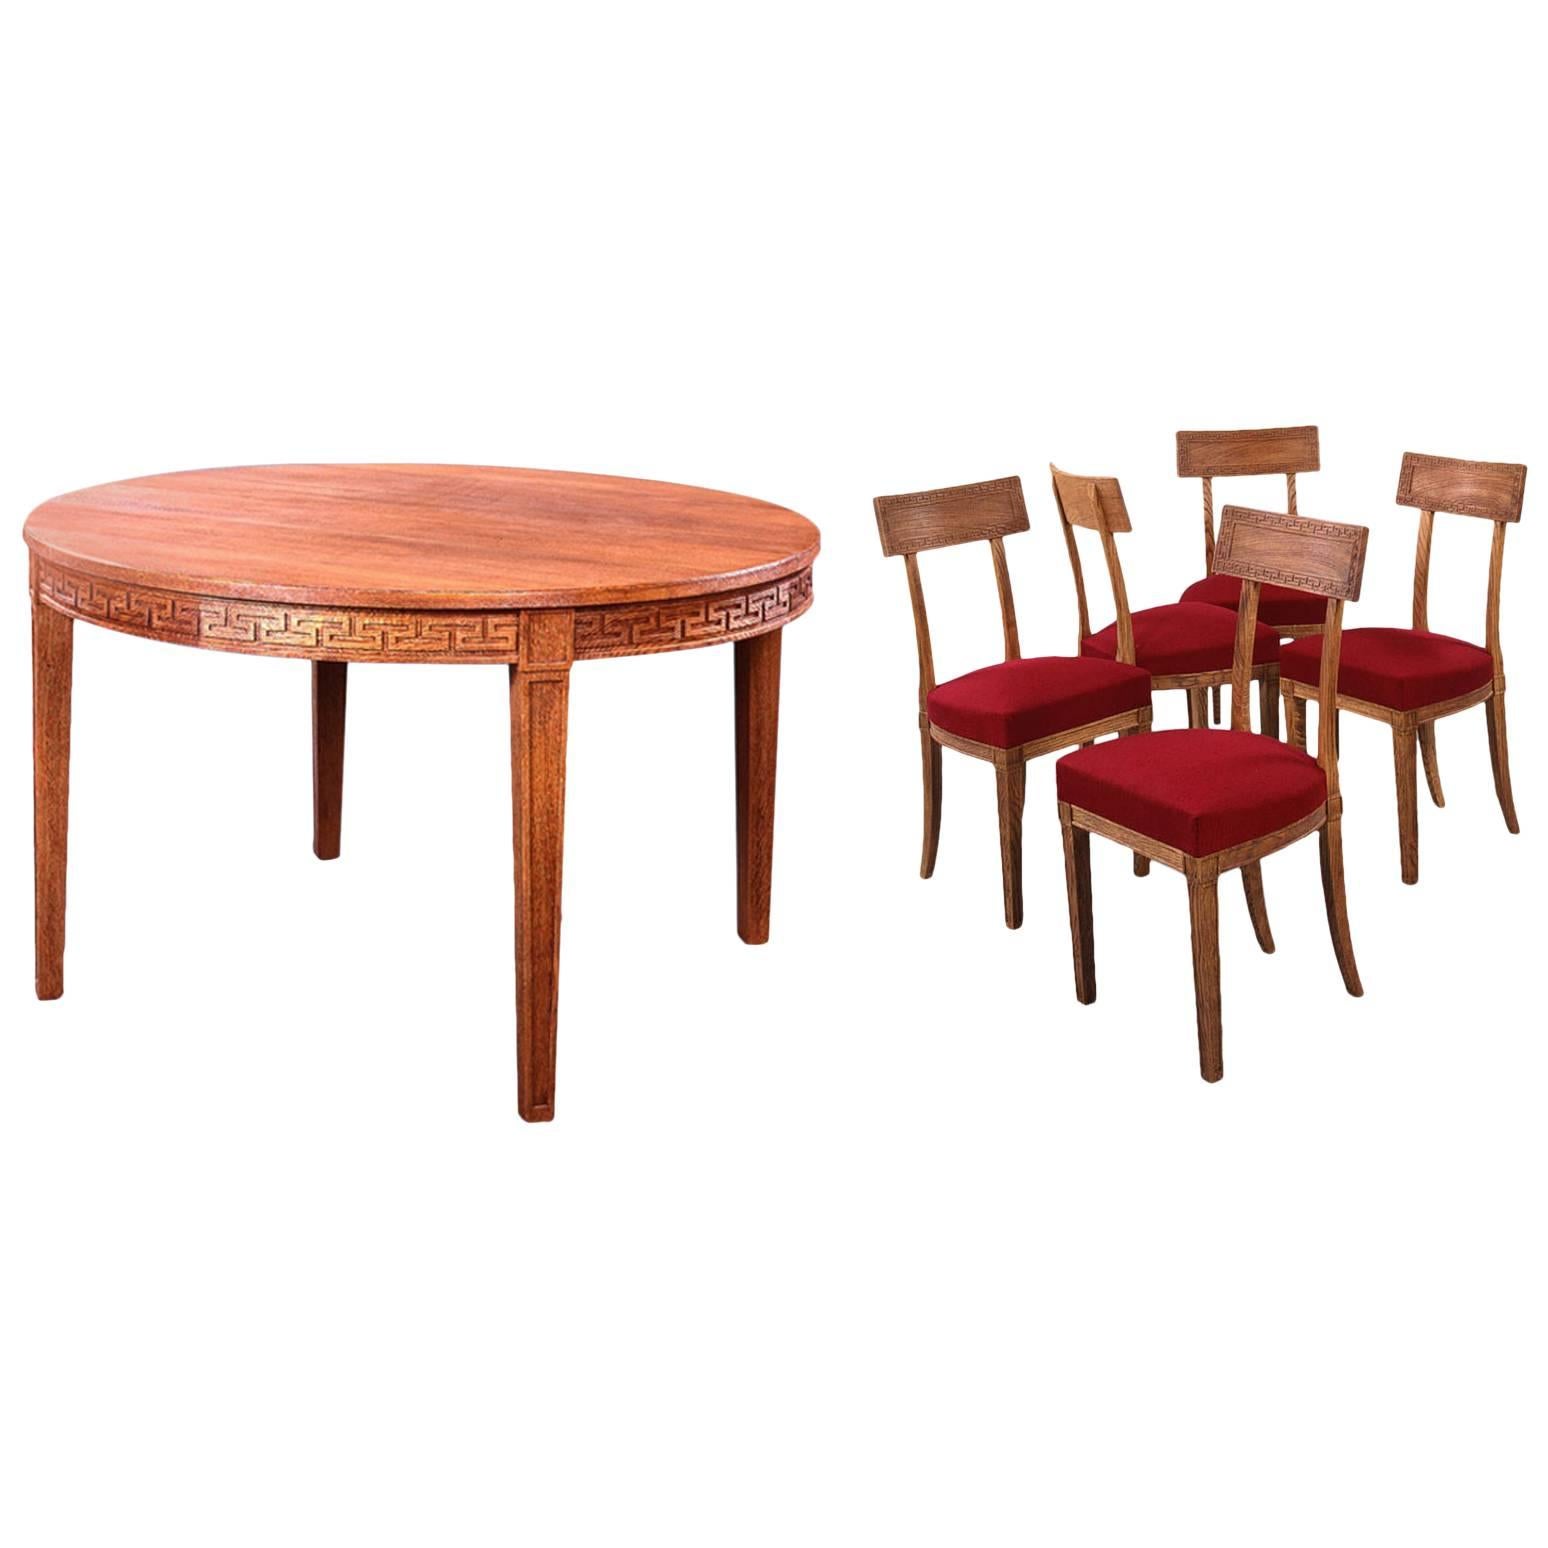 J.M. Frank et A. Chanaux, Dining Room Set of Round Table and 10 Chairs, c.1936 For Sale